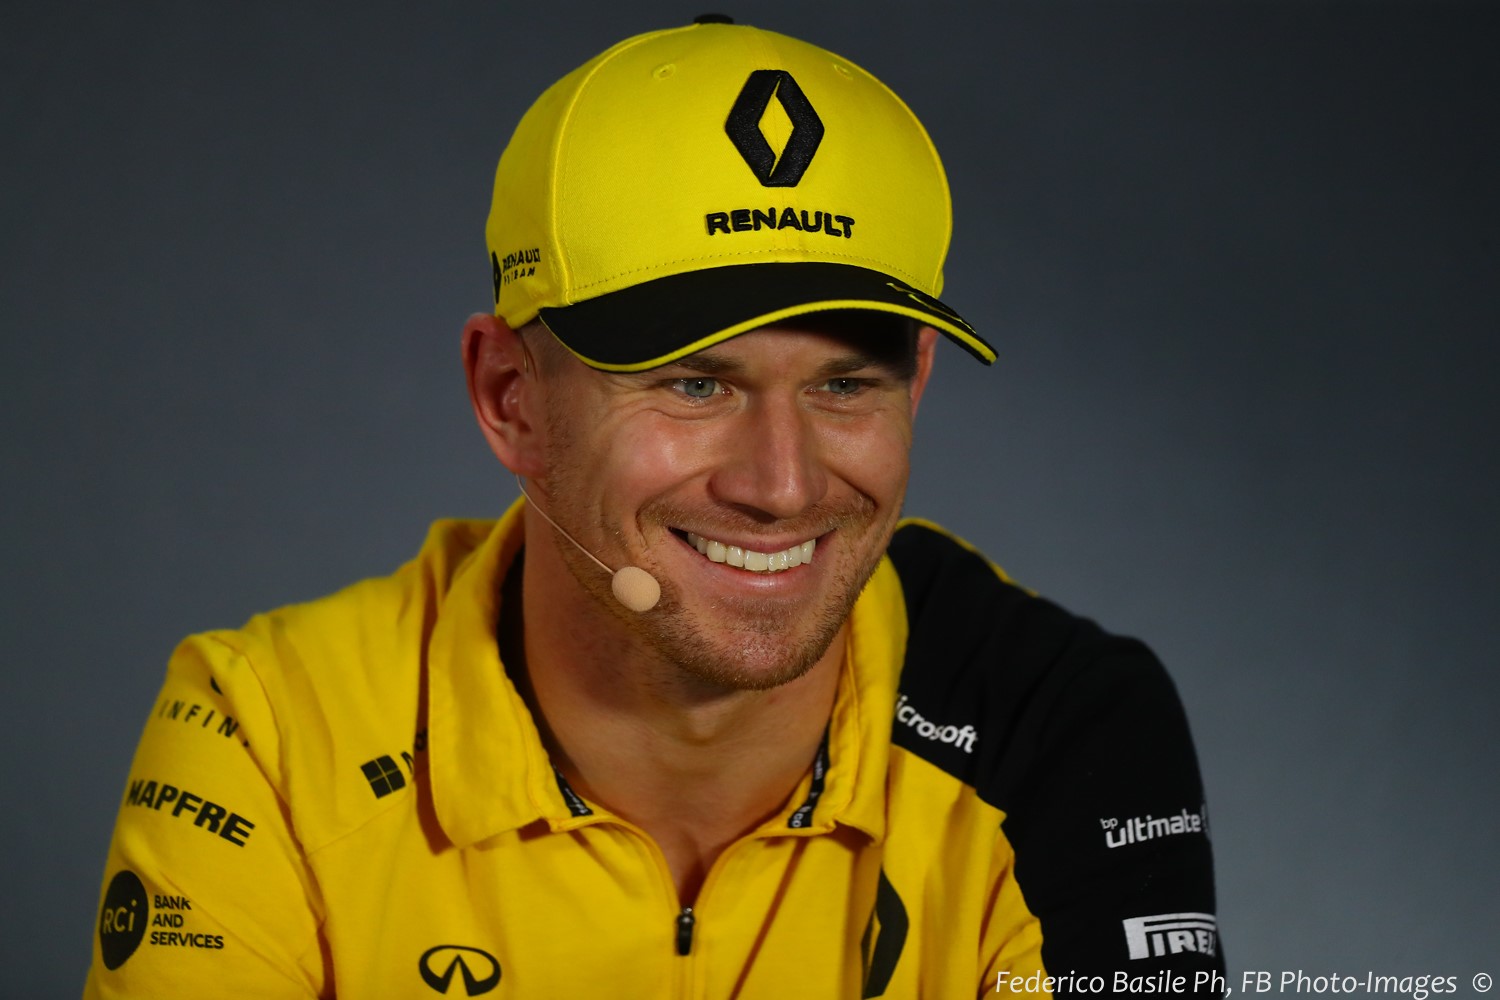 Nico Hulkenberg - it's results that count and Nico has zero. Zero podiums in his entire F1 career